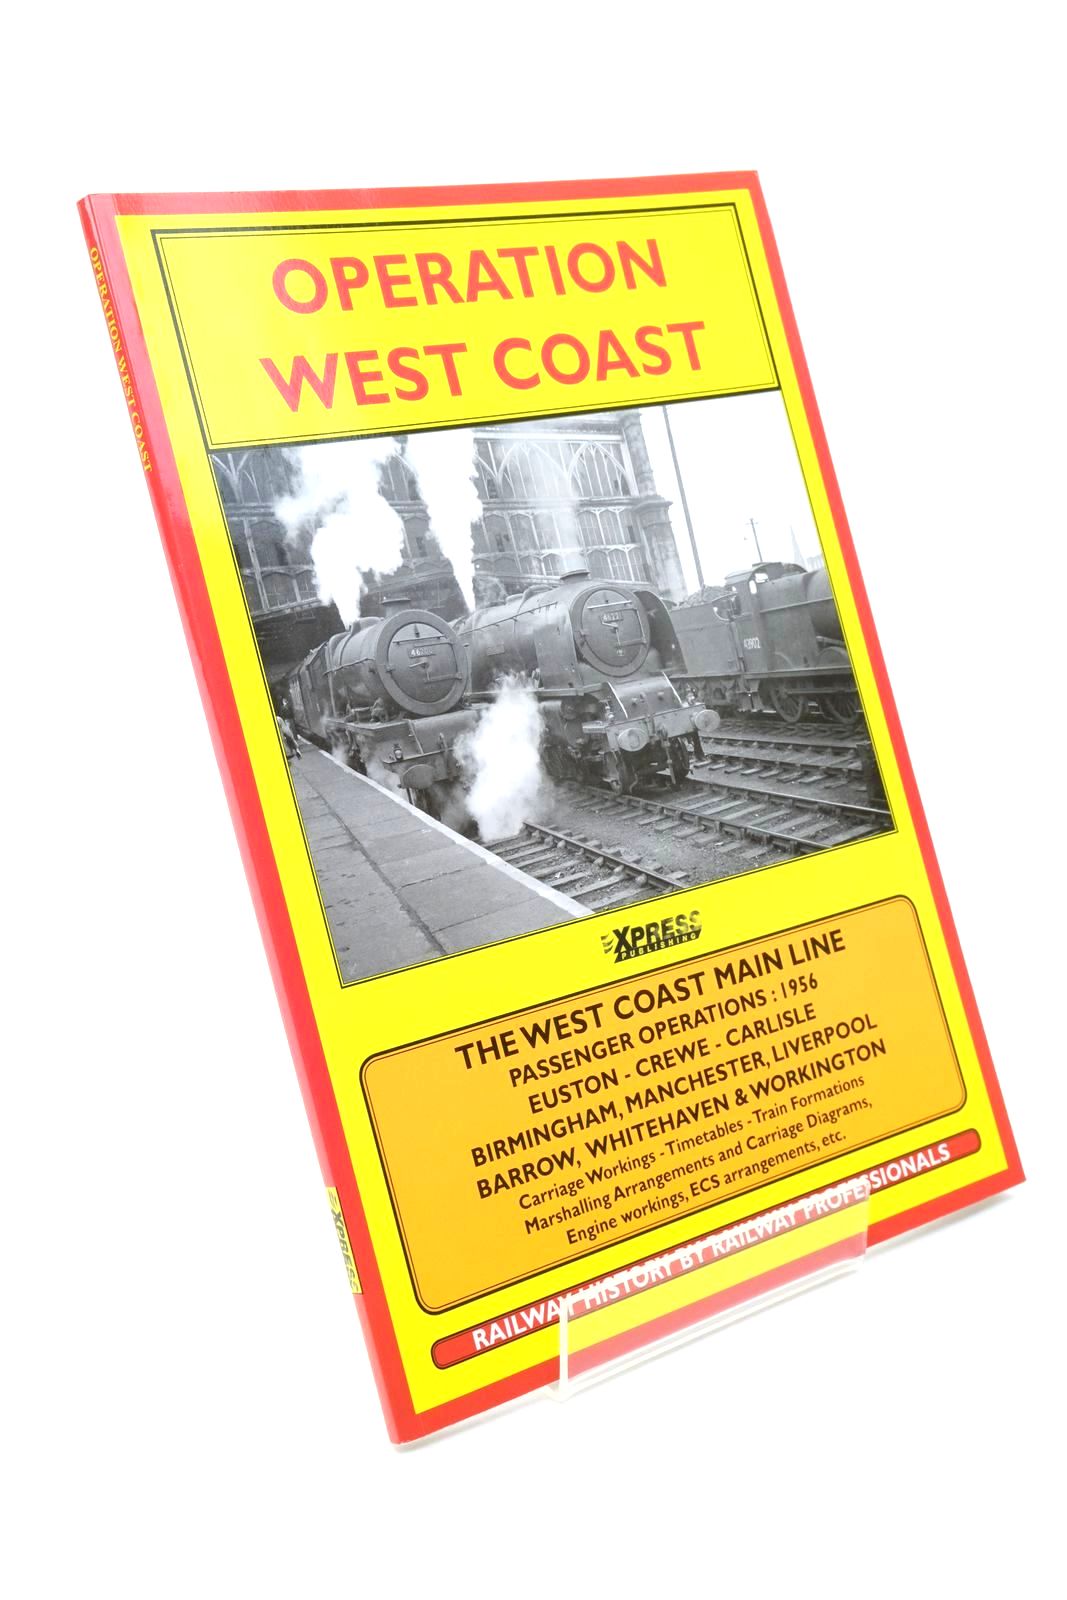 Photo of OPERATION WEST COAST published by Xpress Publising (STOCK CODE: 1322459)  for sale by Stella & Rose's Books